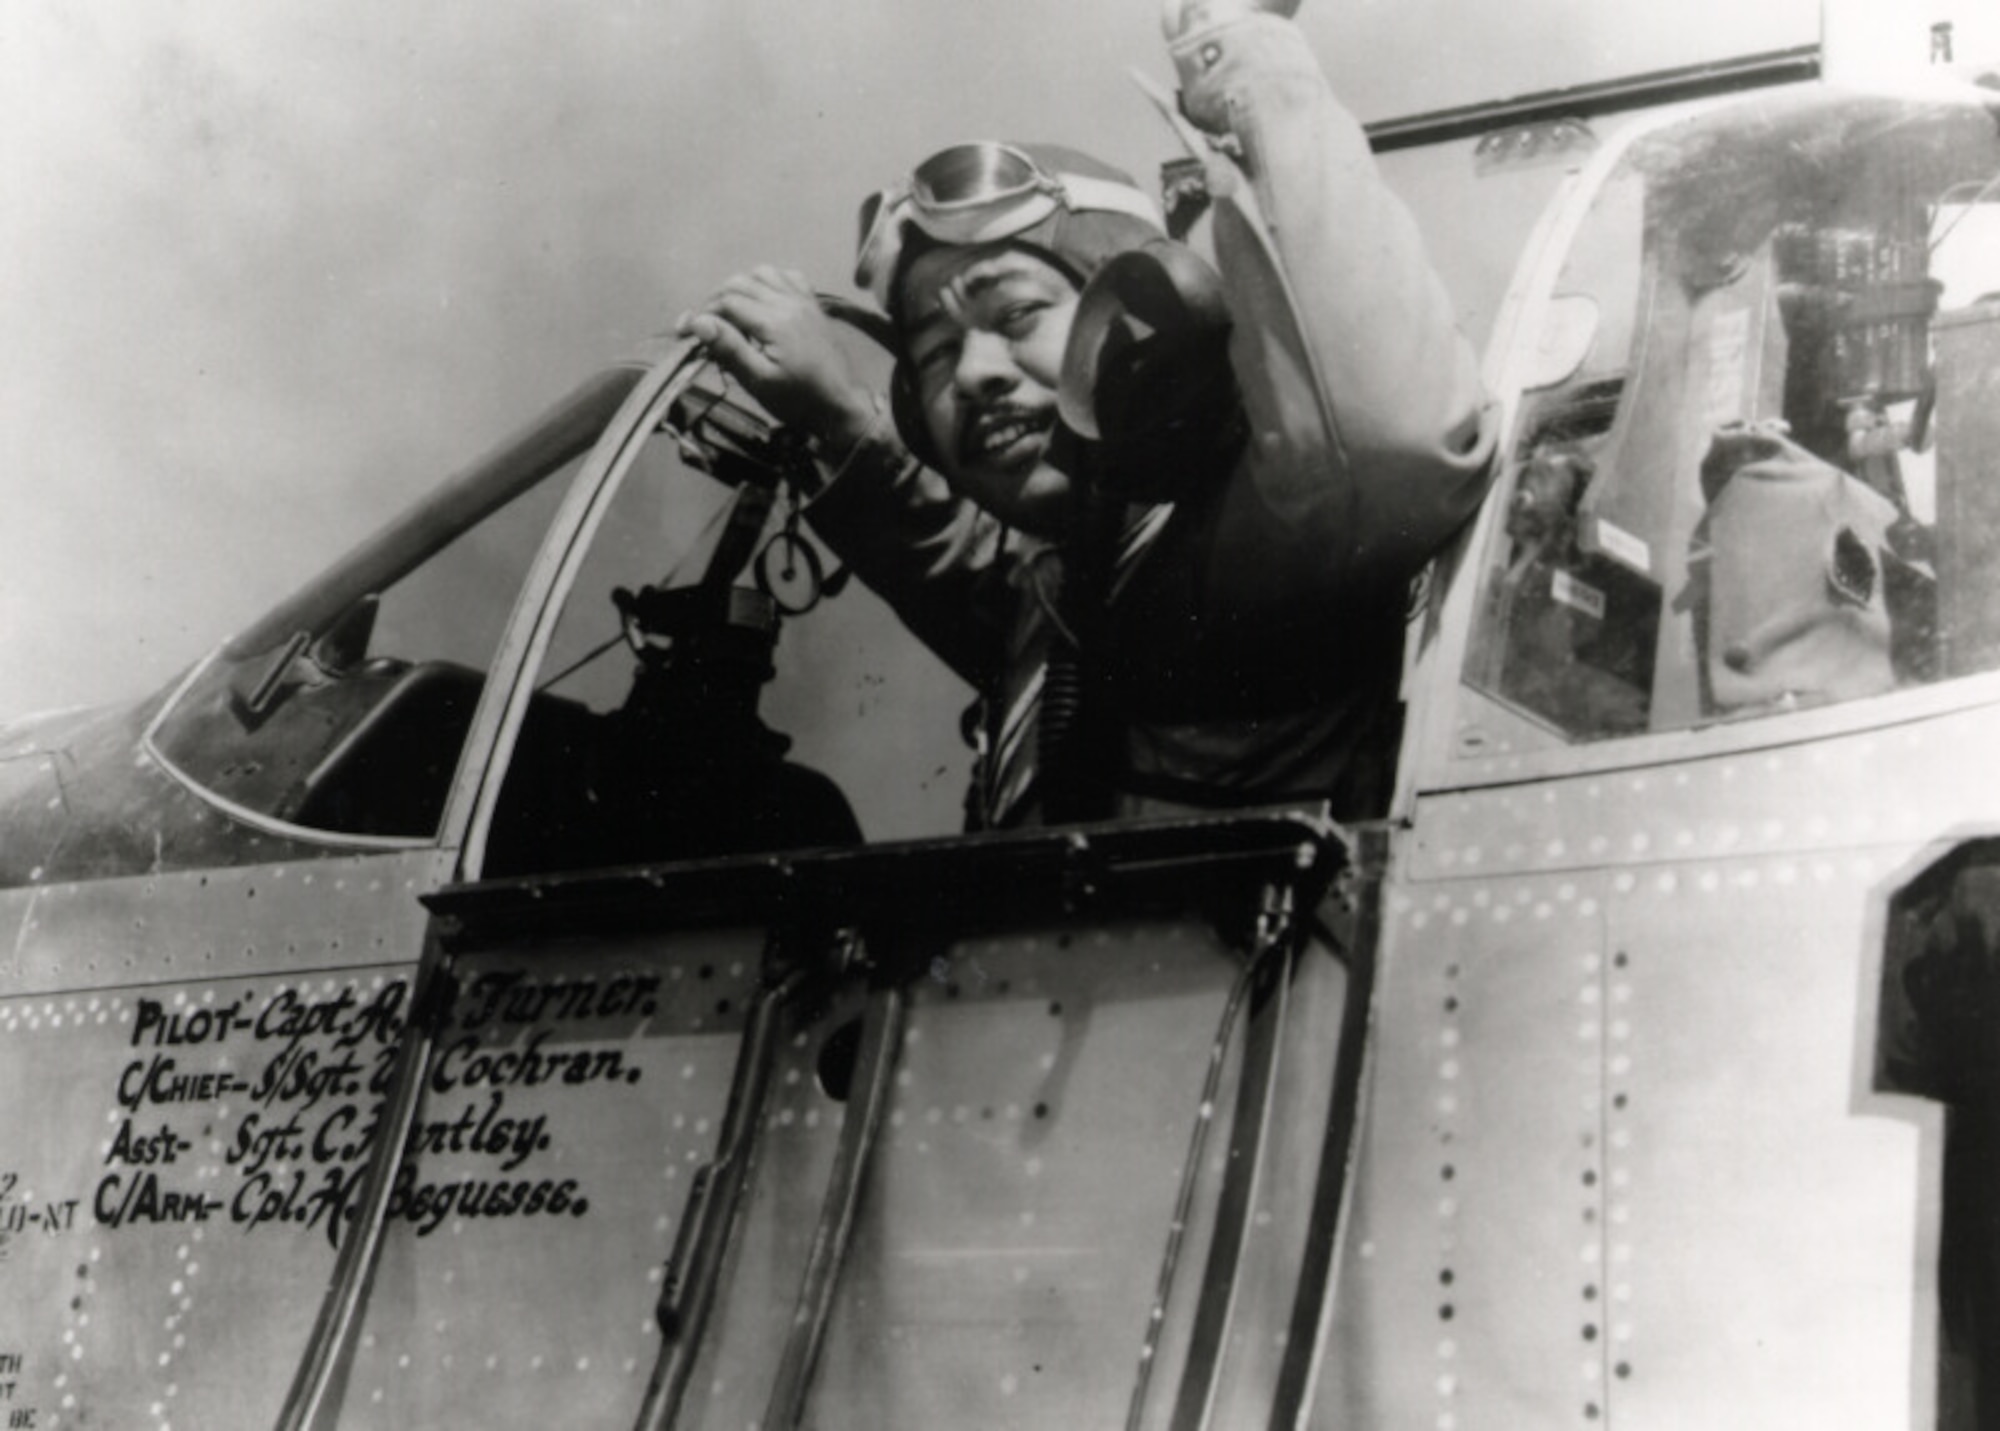 Tuskegee Airman in P-51